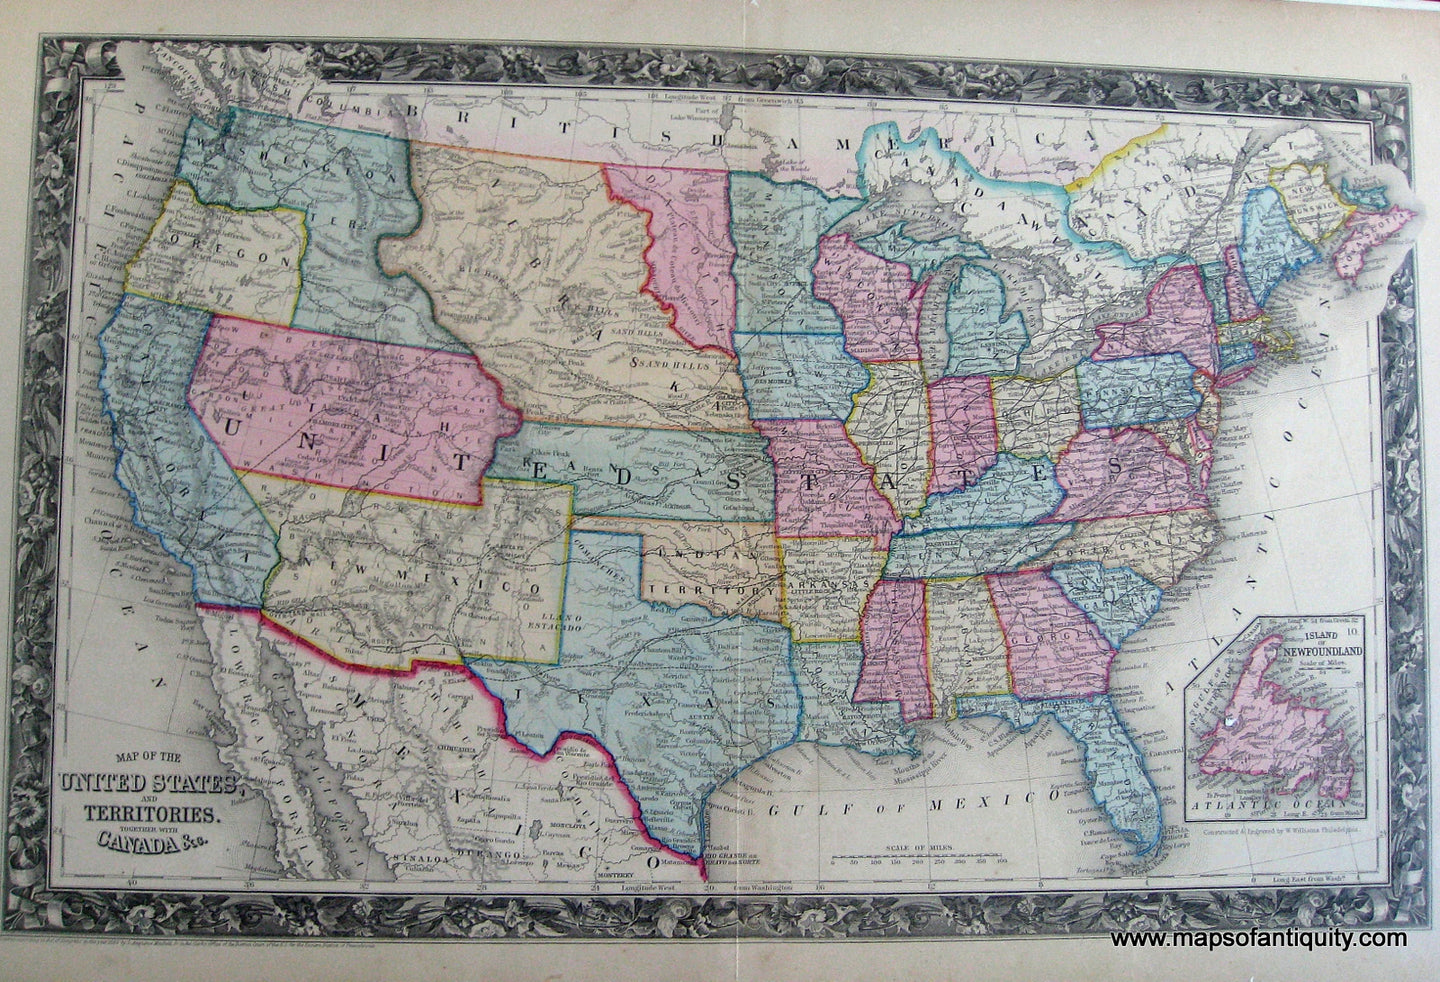 Antique-Hand-Colored-Map-Map-of-the-United-States-and-Territories.-Together-with-Canada-etc.****-United-States-United-States-General---1860-Mitchell-Maps-Of-Antiquity